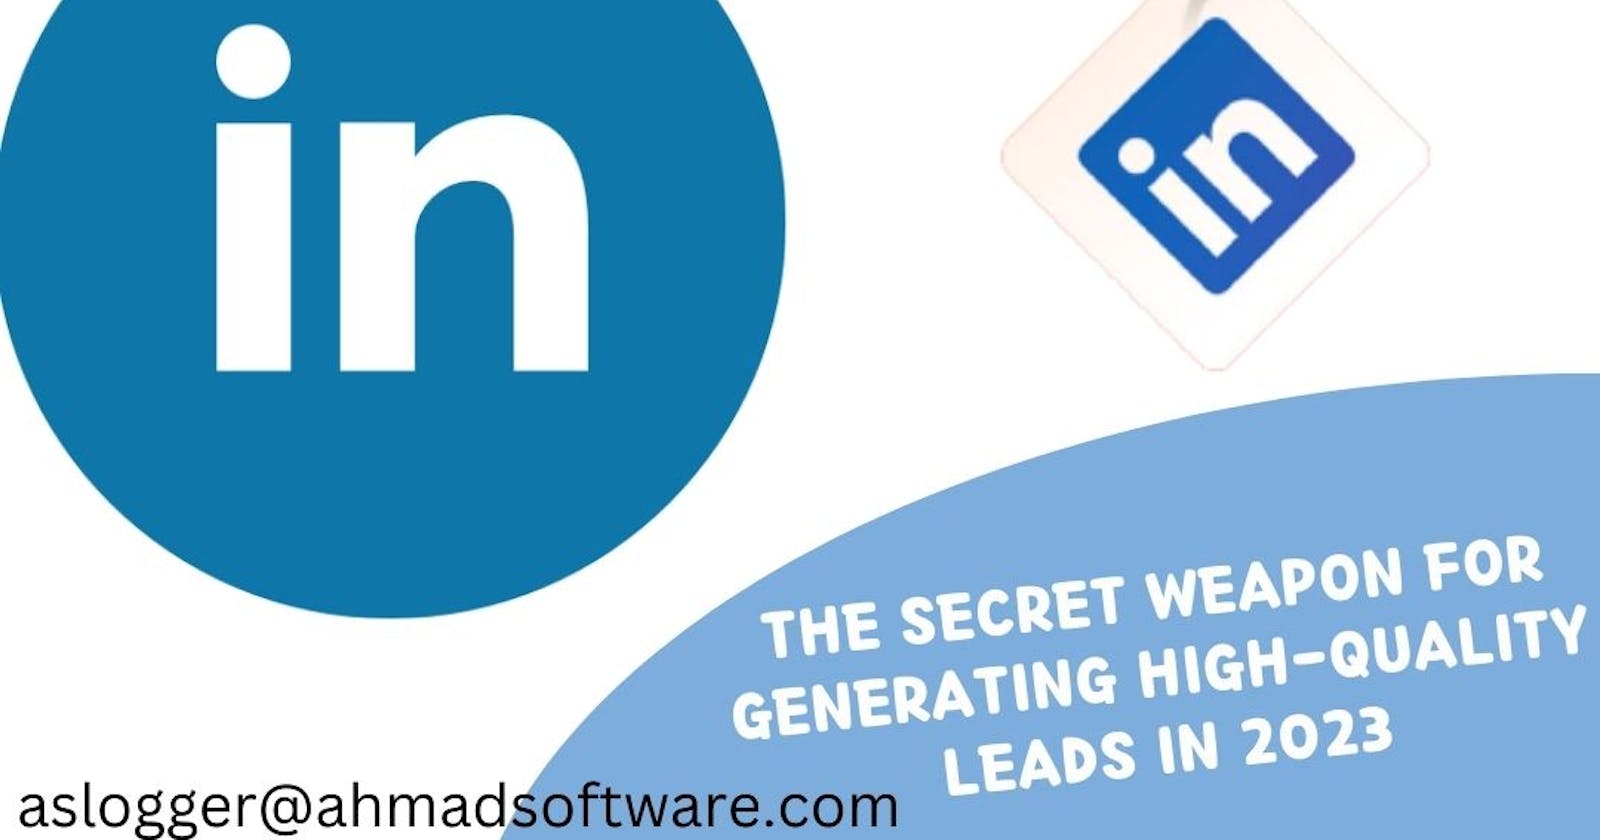 How To Find And Generate Leads From LinkedIn?